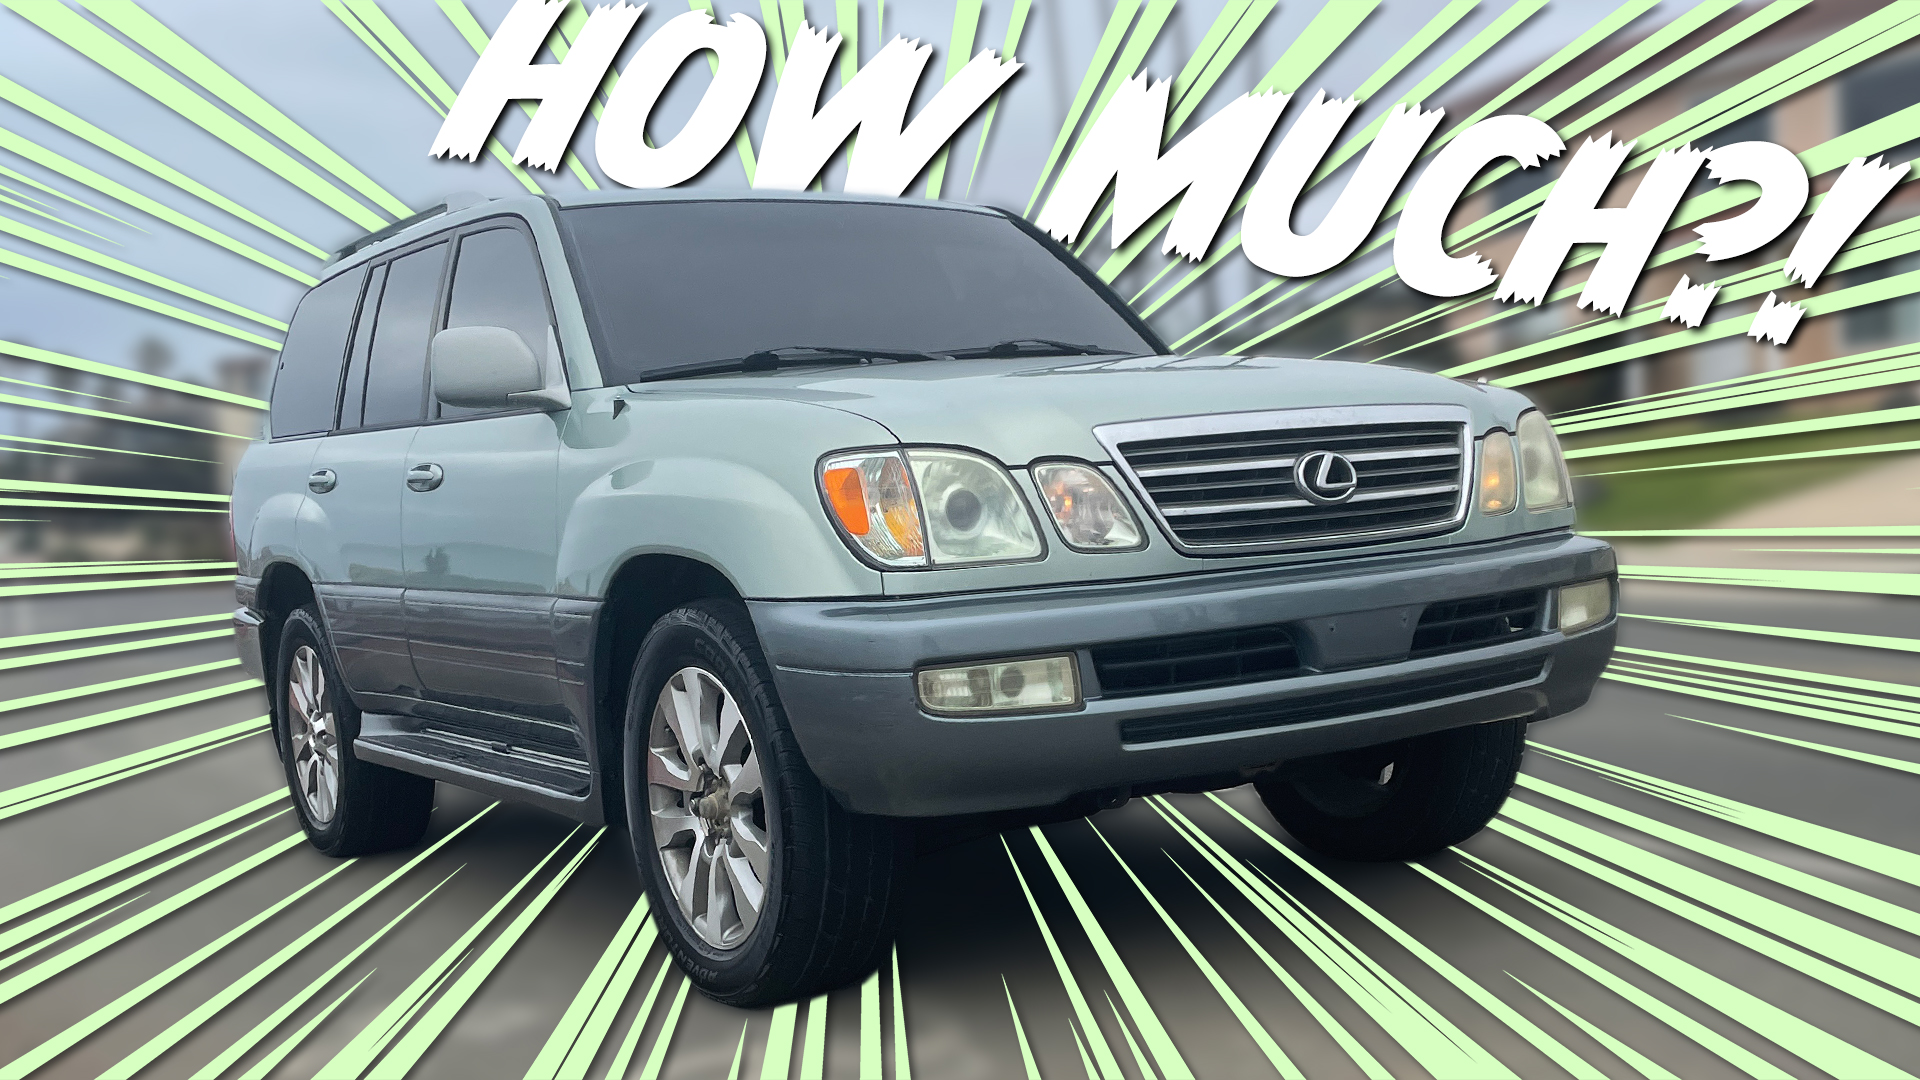 How much would you pay for this 2004 Lexus LX470?